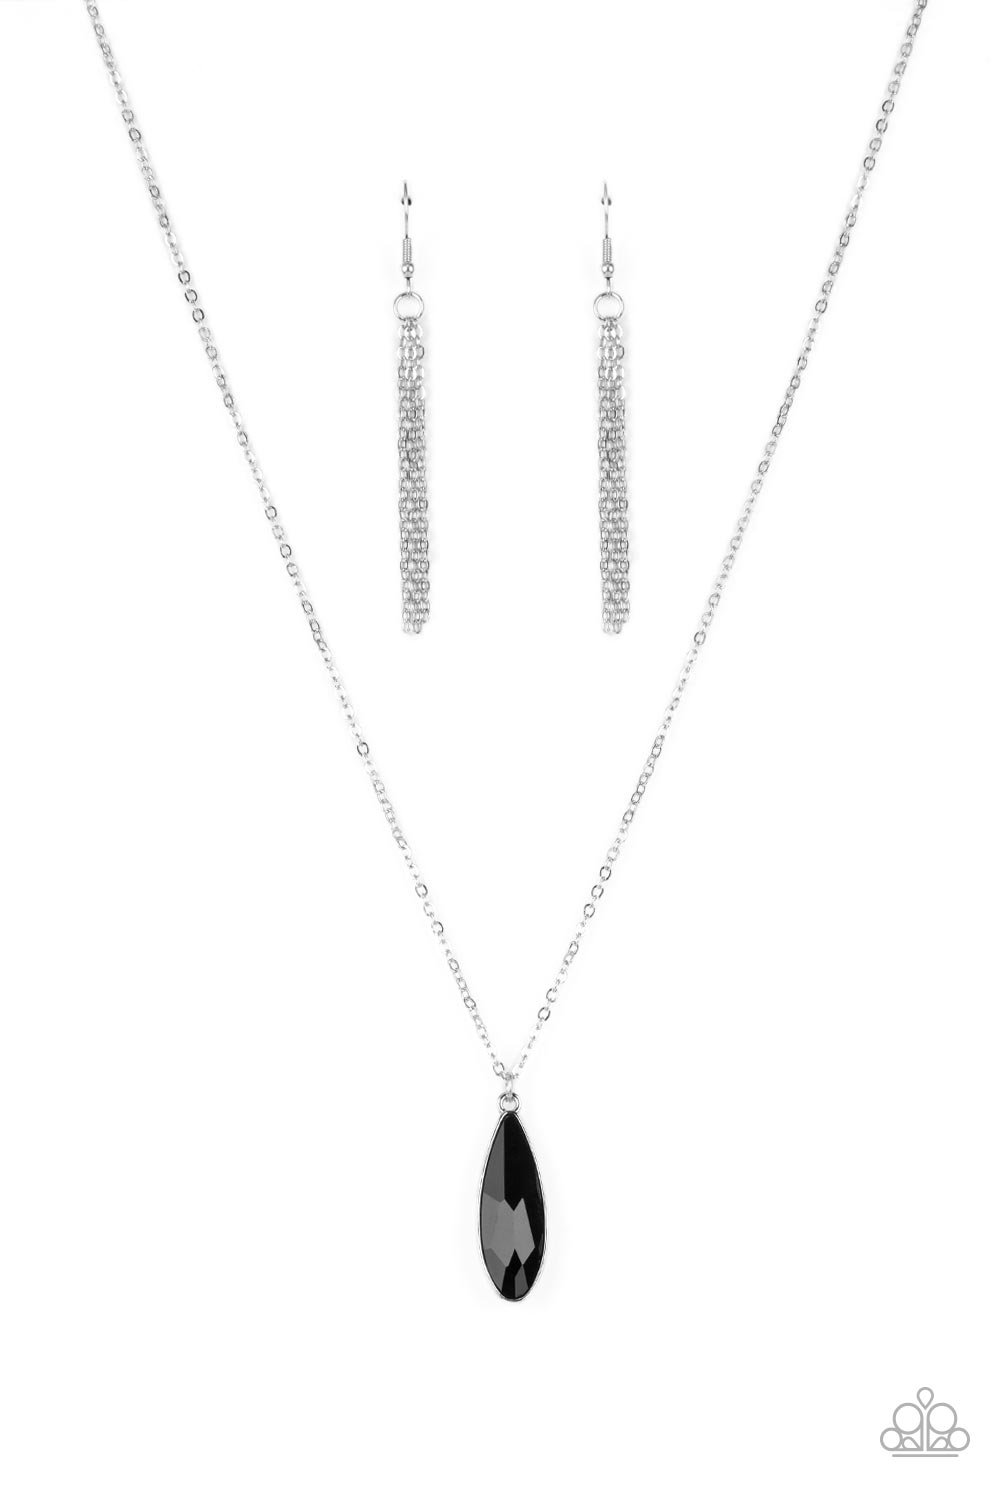 five-dollar-jewelry-prismatically-polished-black-necklace-paparazzi-accessories